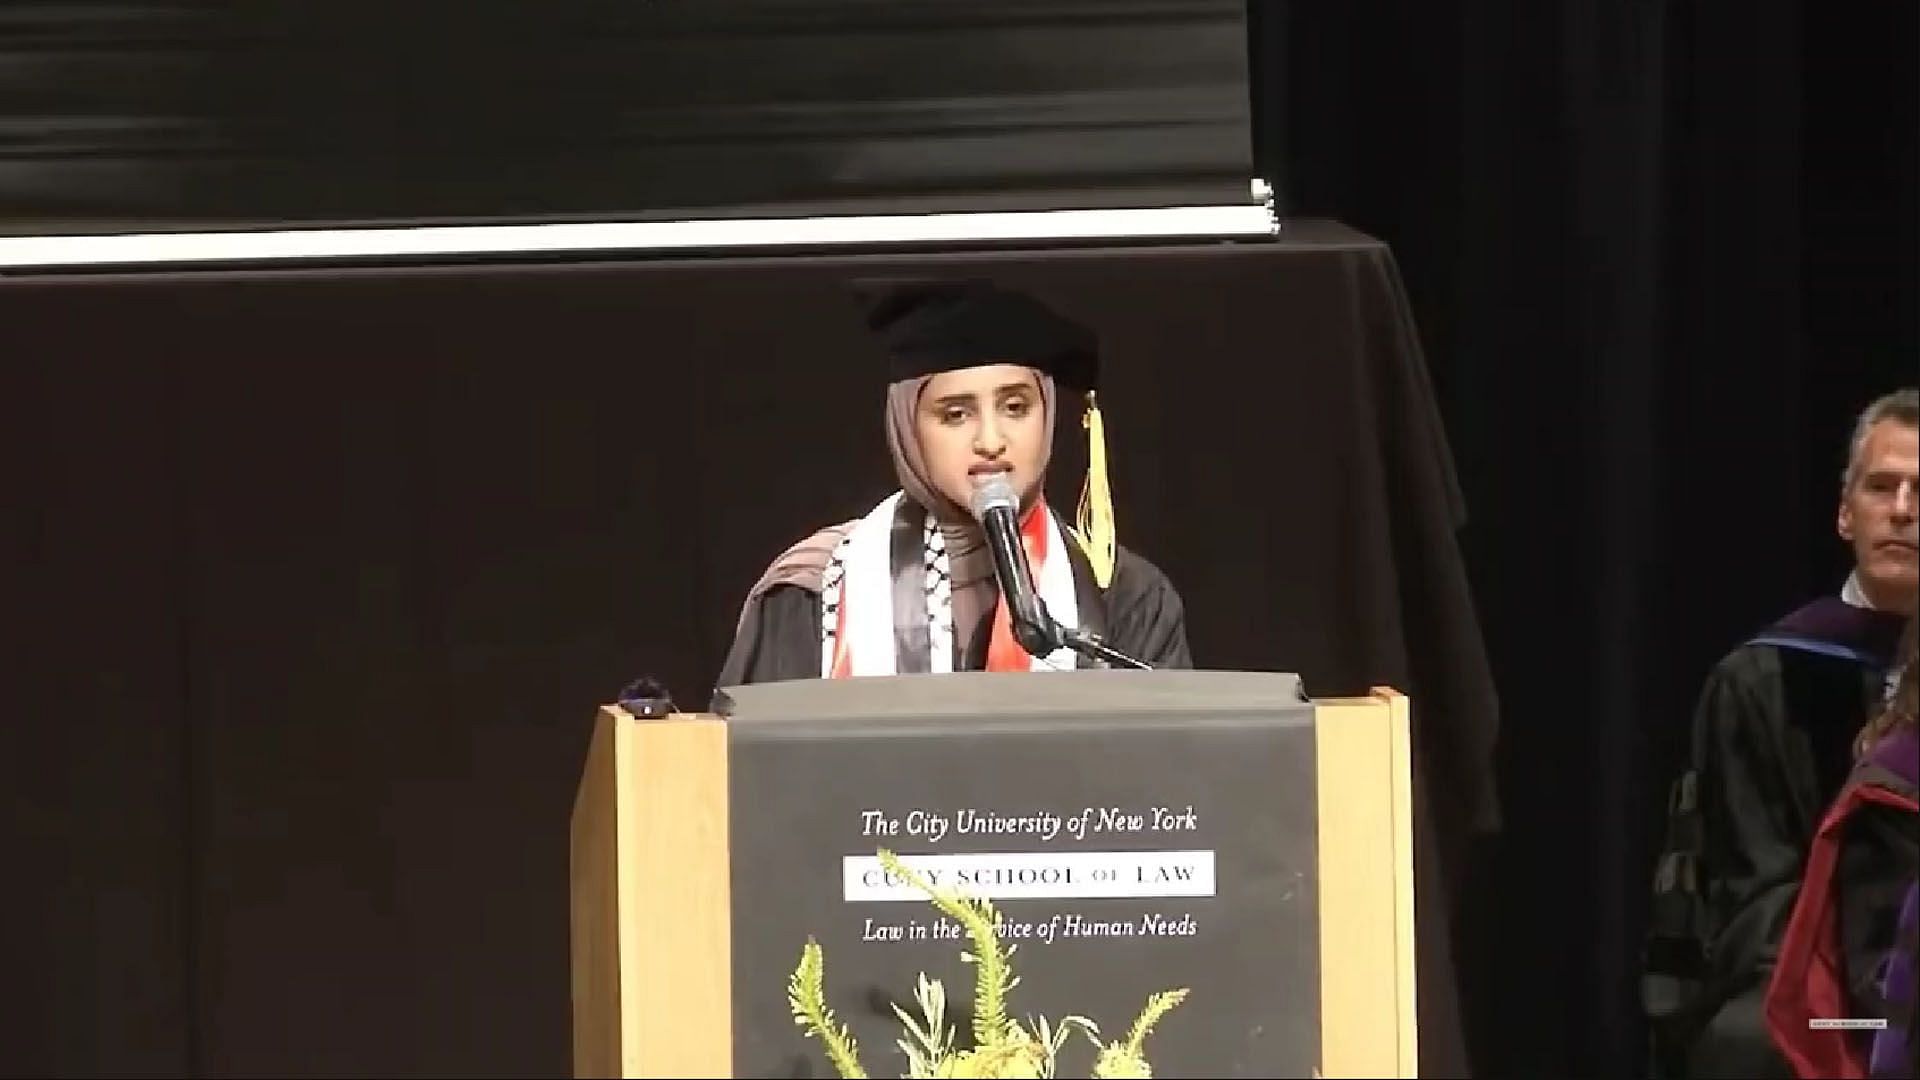 CUNY law school commencement speech has left internet enraged (Image via Twitter/@SFAECUNY)